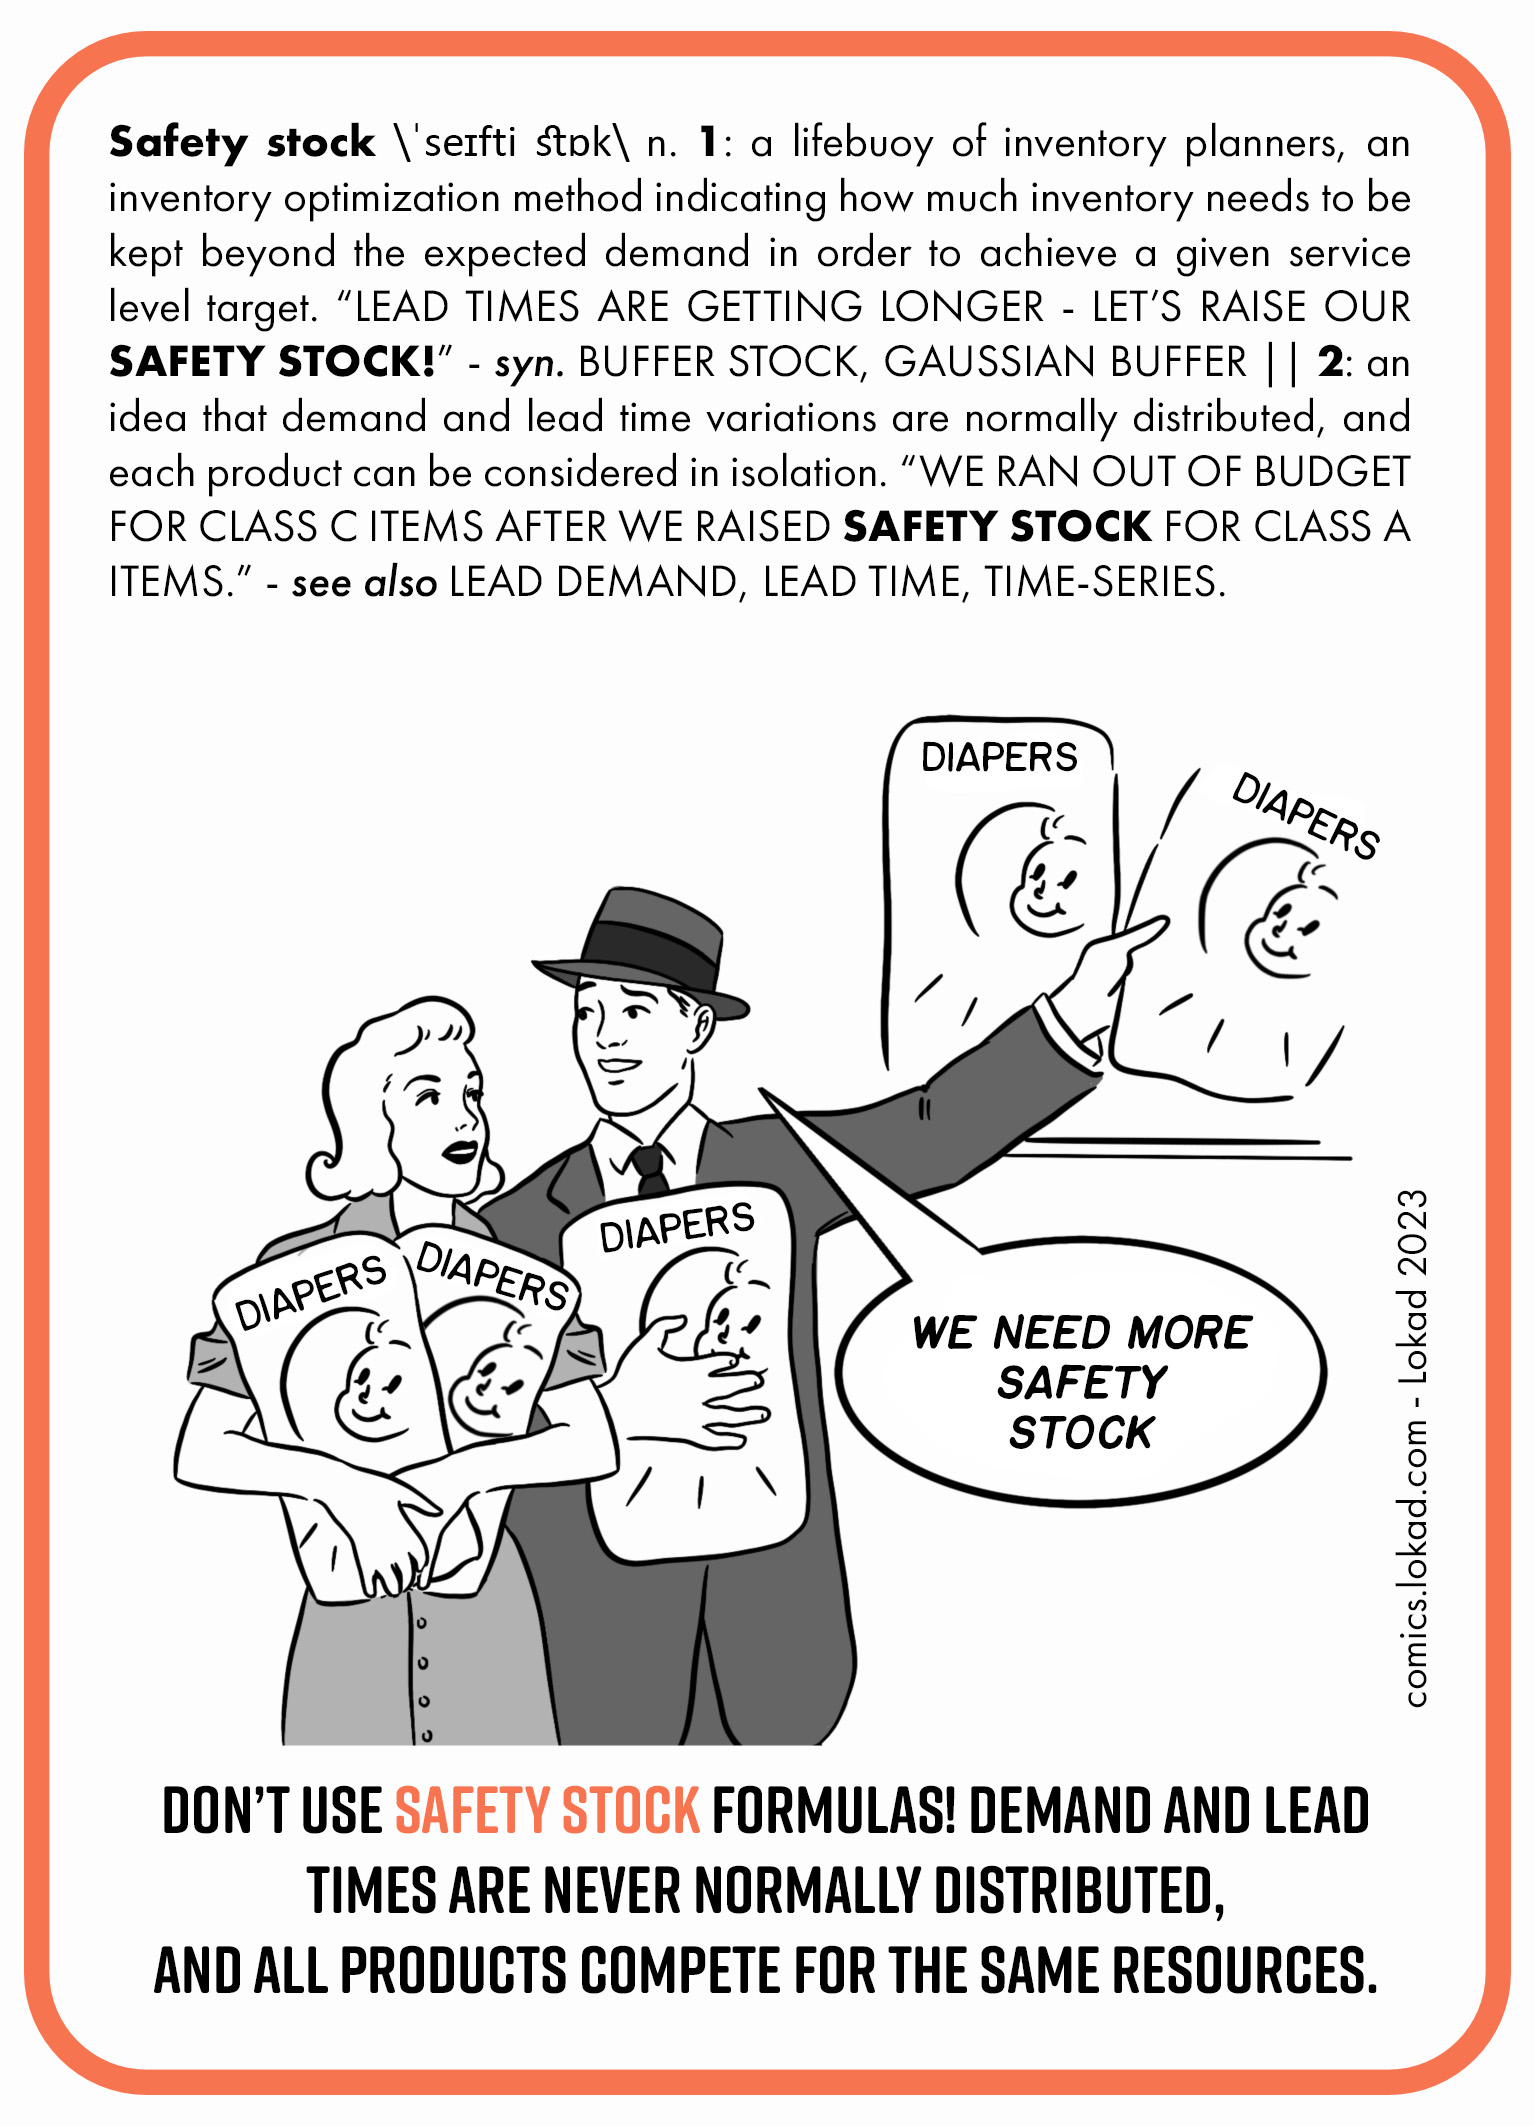 Supply chain flashcard on Safety stock, which is an inventory optimization method used to determine the extra inventory needed beyond expected demand to meet service level target. It critiques the use of standard safety stock formulas, suggesting they are inadequate due to variability in demand and competition for resources. The illustration depicts a young couple with multiple packages of diapers and husband taking one more package off the shelf while saying they need more safety stock.